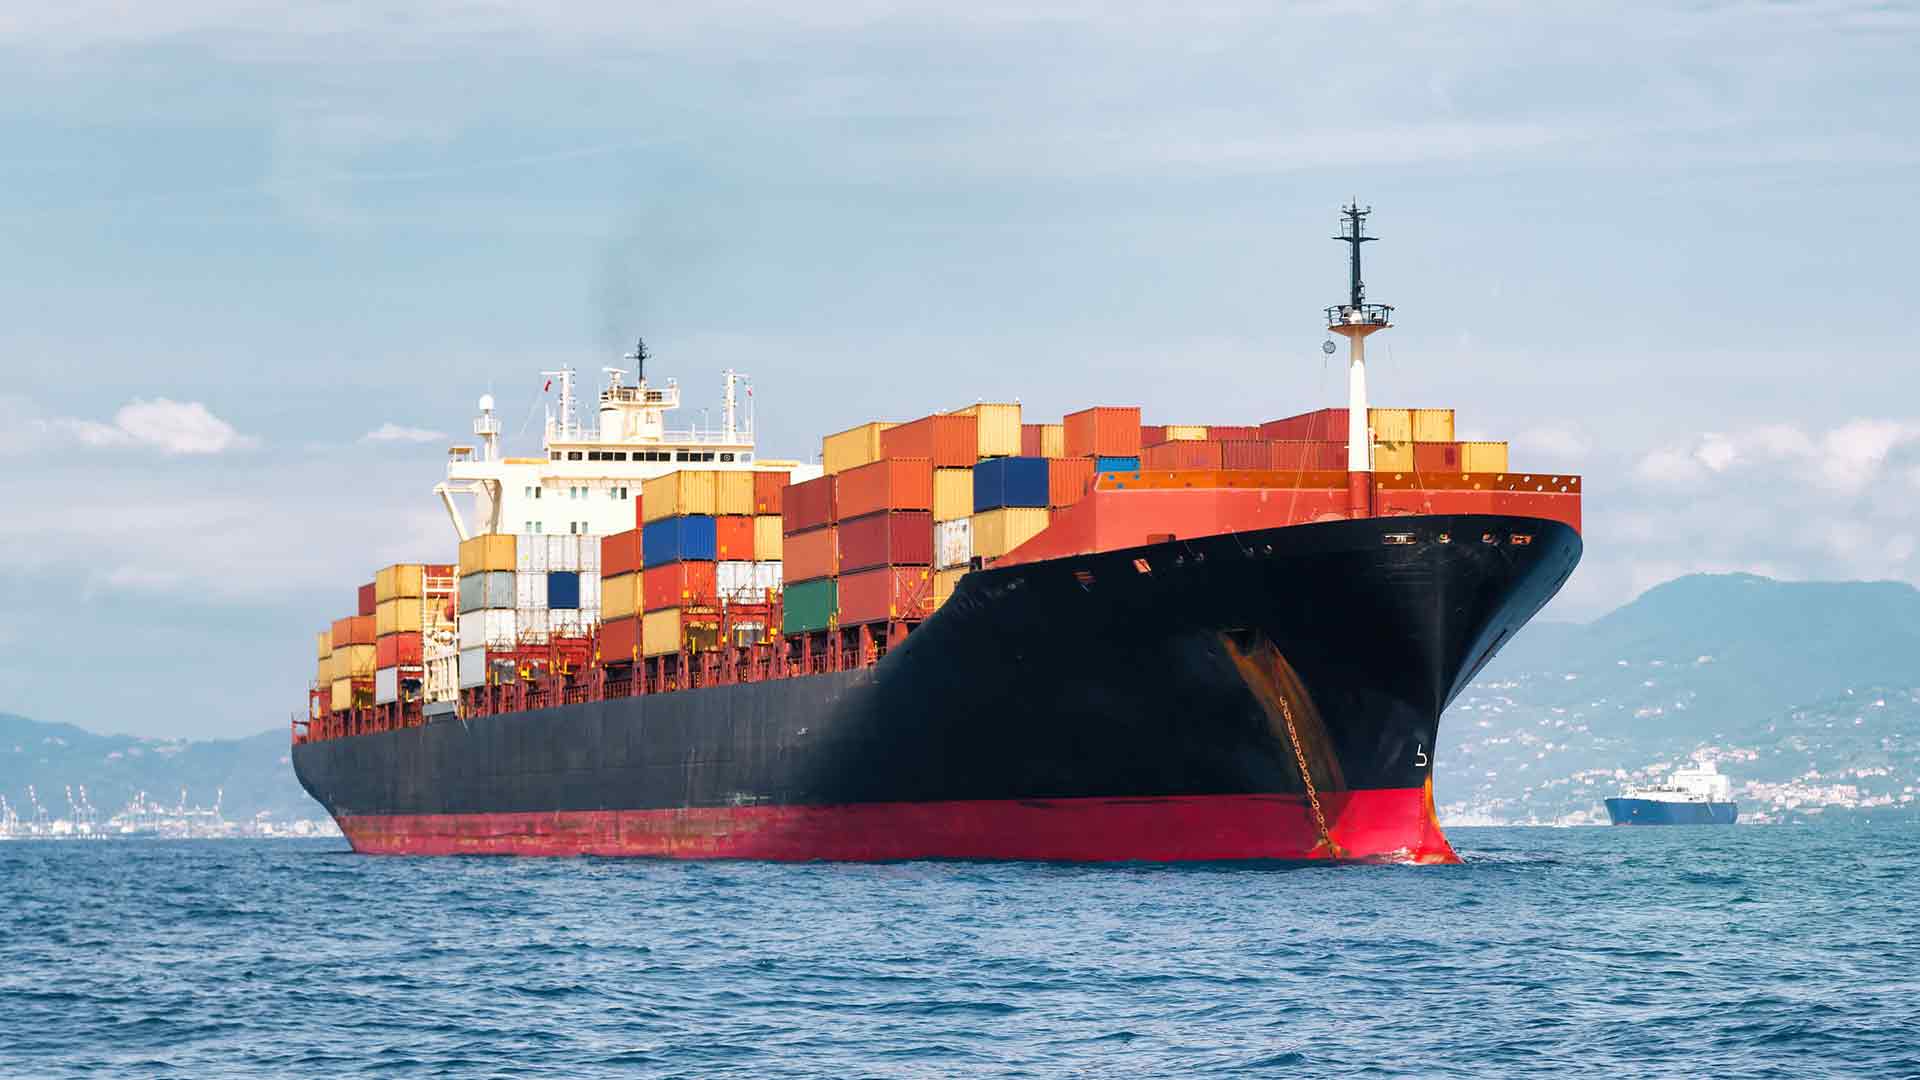 Photo of a ocean ship carrying containers